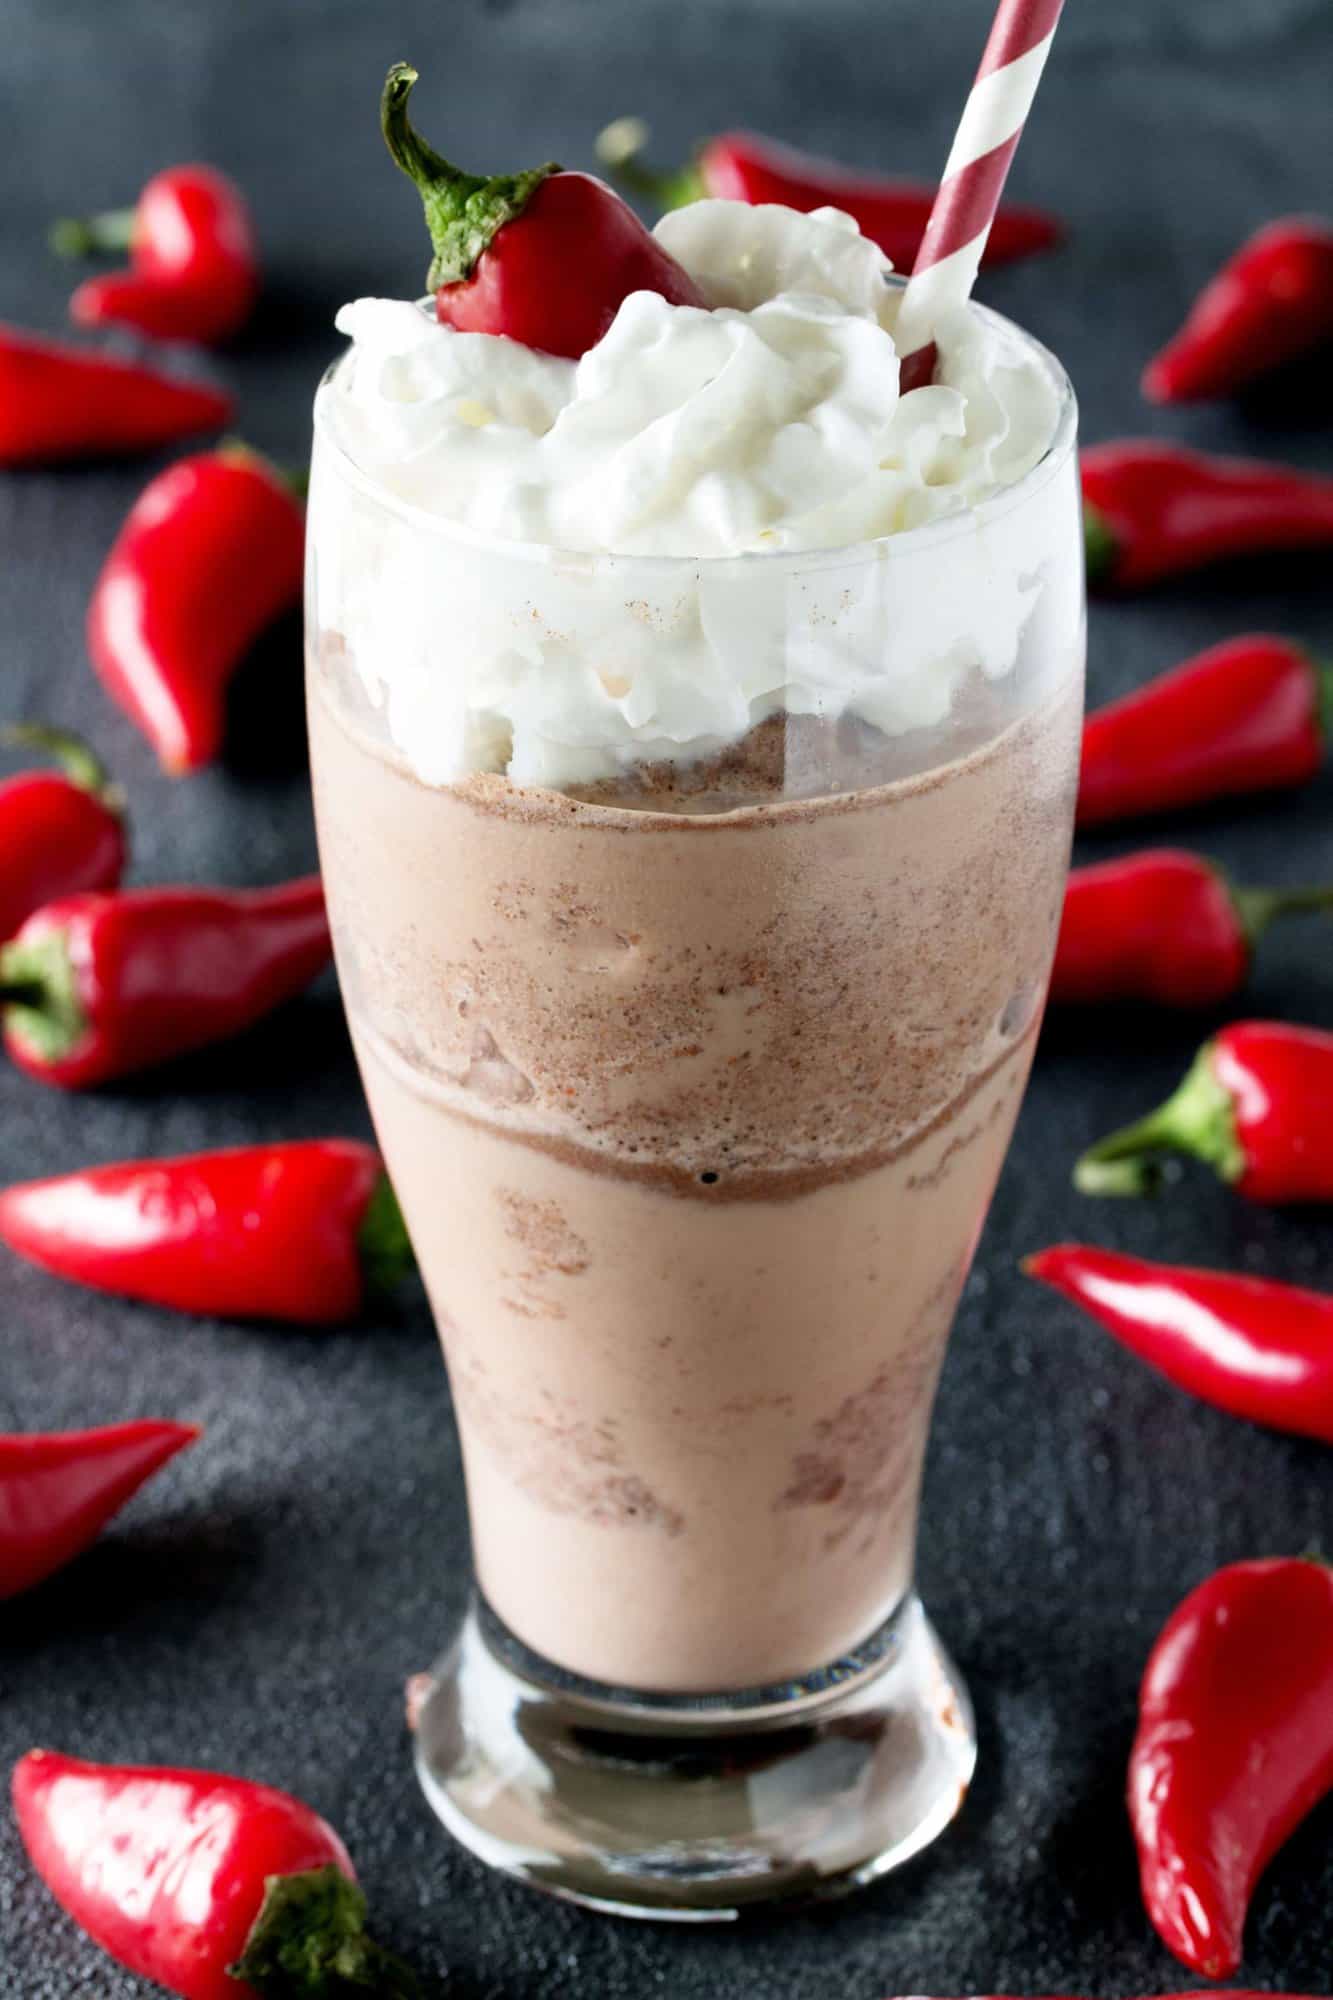 Mexican Chocolate Frappe with red peppers spread on the table.